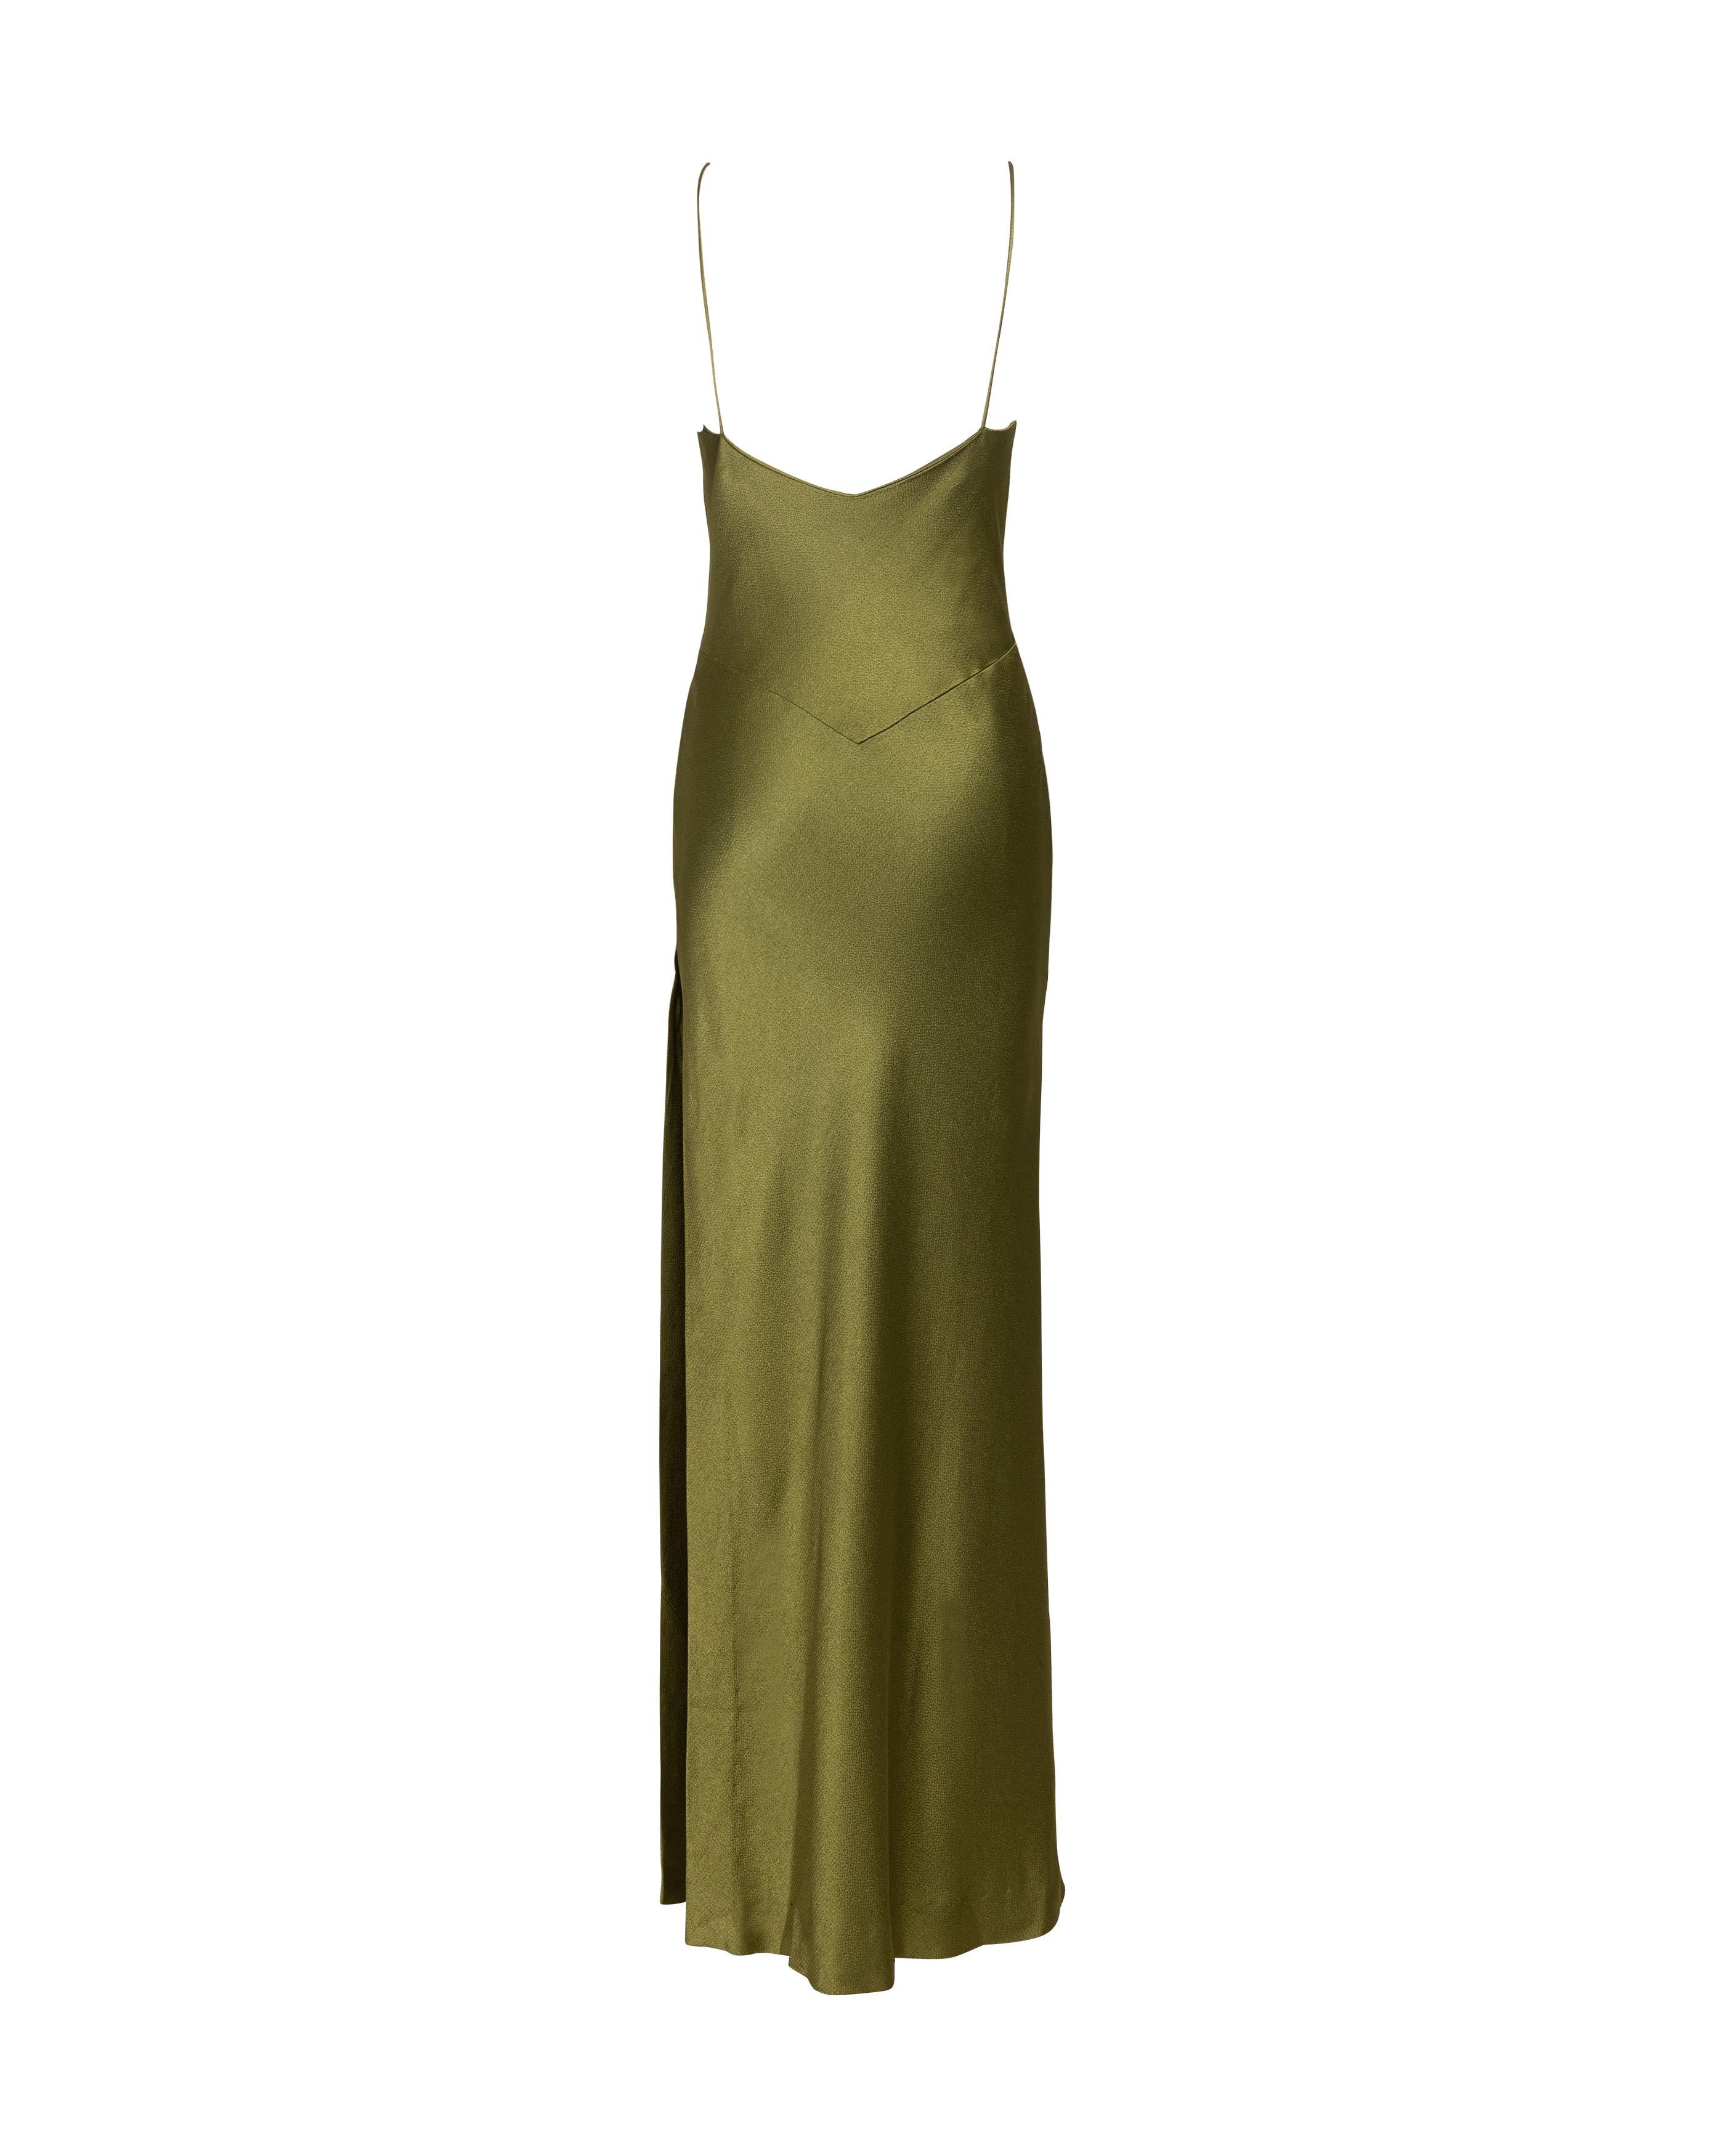 S/S 1999 Christian Dior by John Galliano Olive Green Bias Cut Slip Gown 2